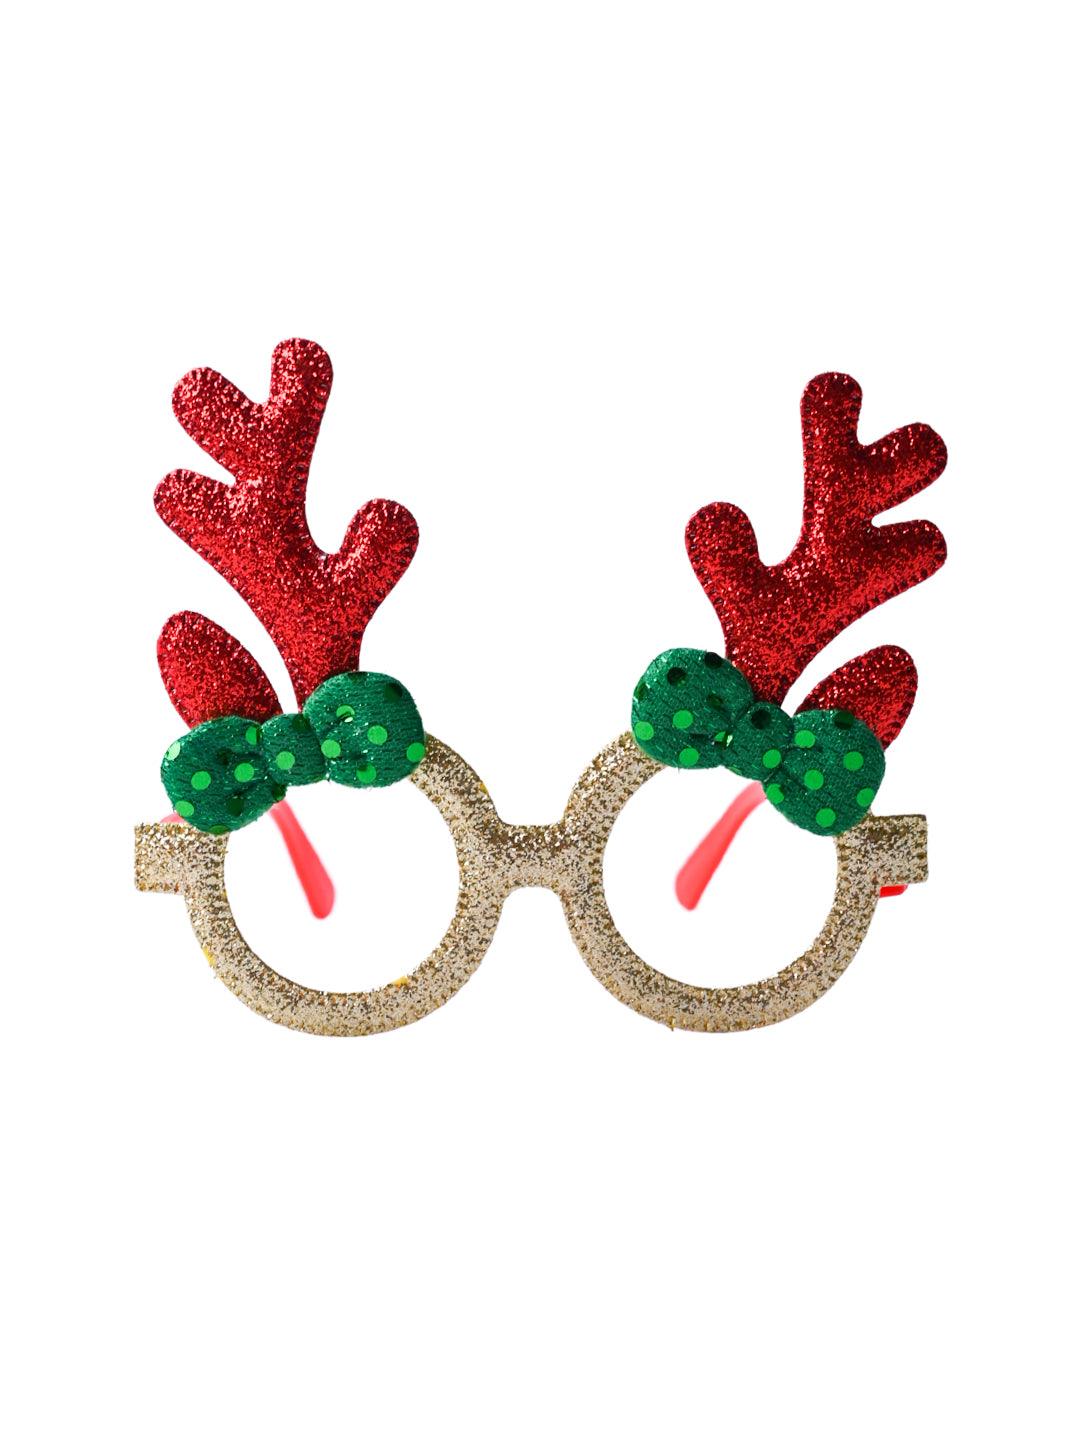 Christmas Raindeer Horns Party Spectacles (Red, Green & Gold, Set Of 2) - MARKET99